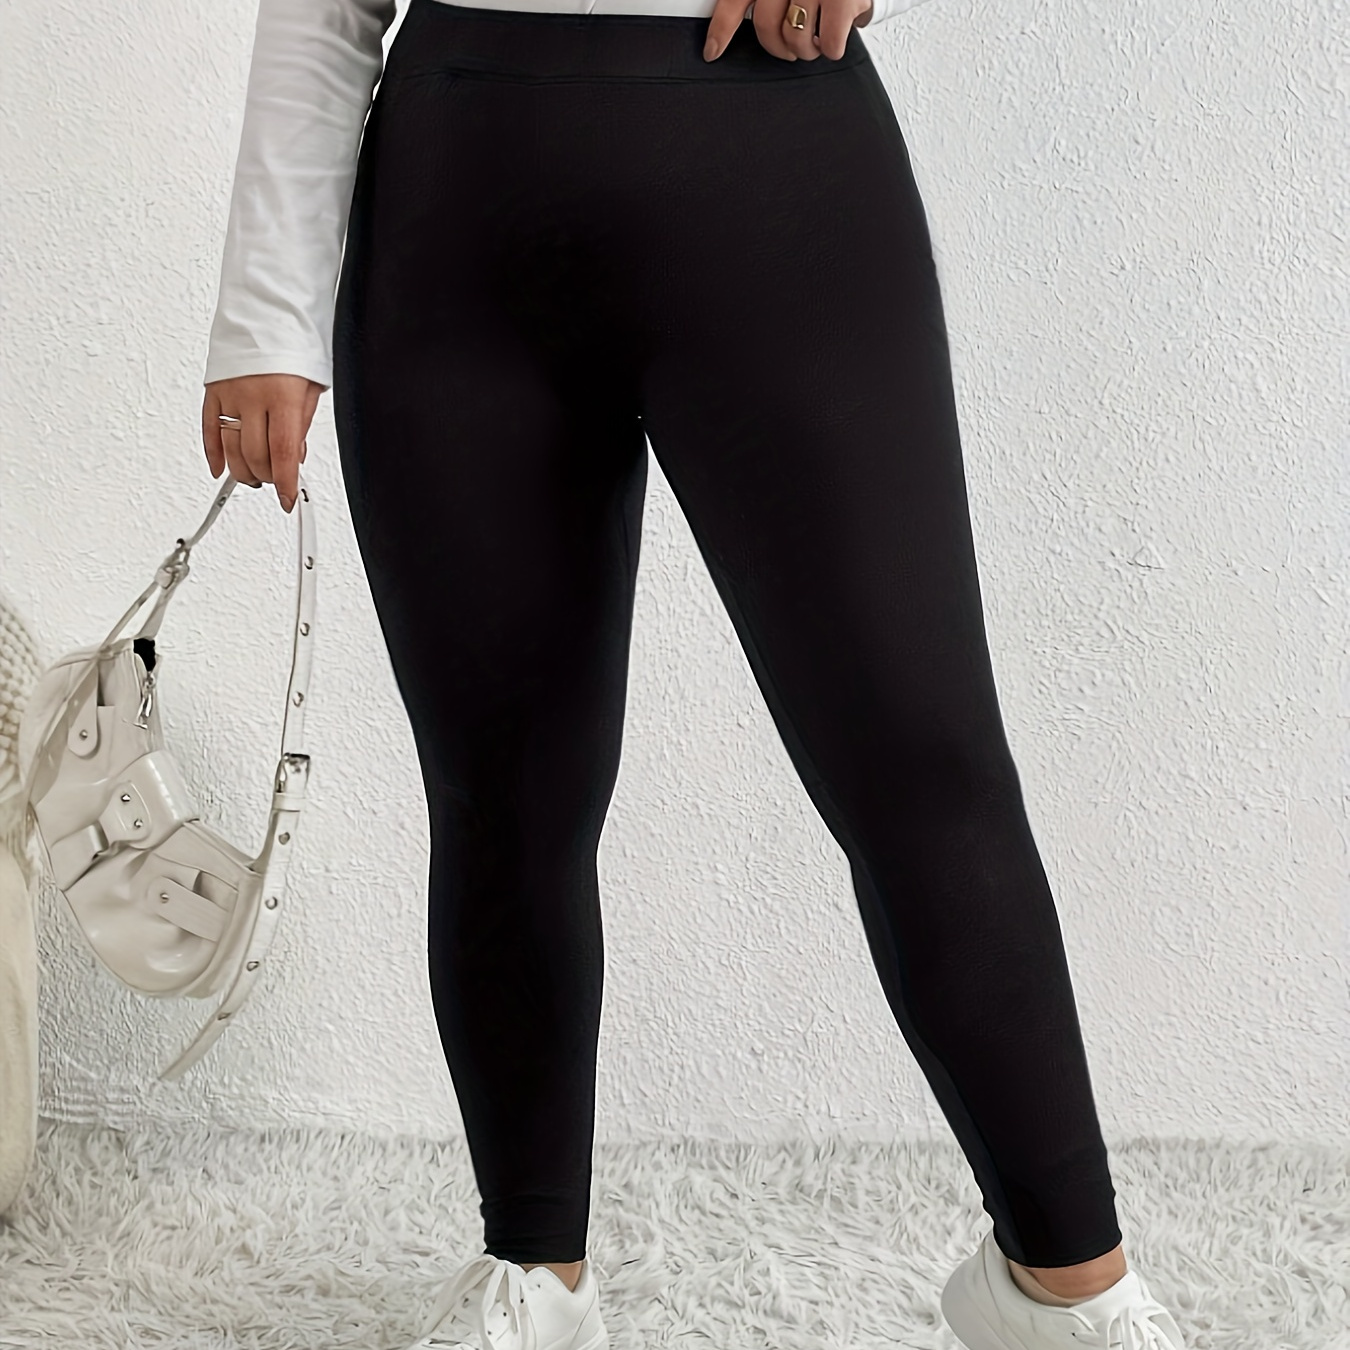 

Plus Size Solid Skinny Leggings, Casual Every Day Stretchy Leggings, Women's Plus Size Clothing